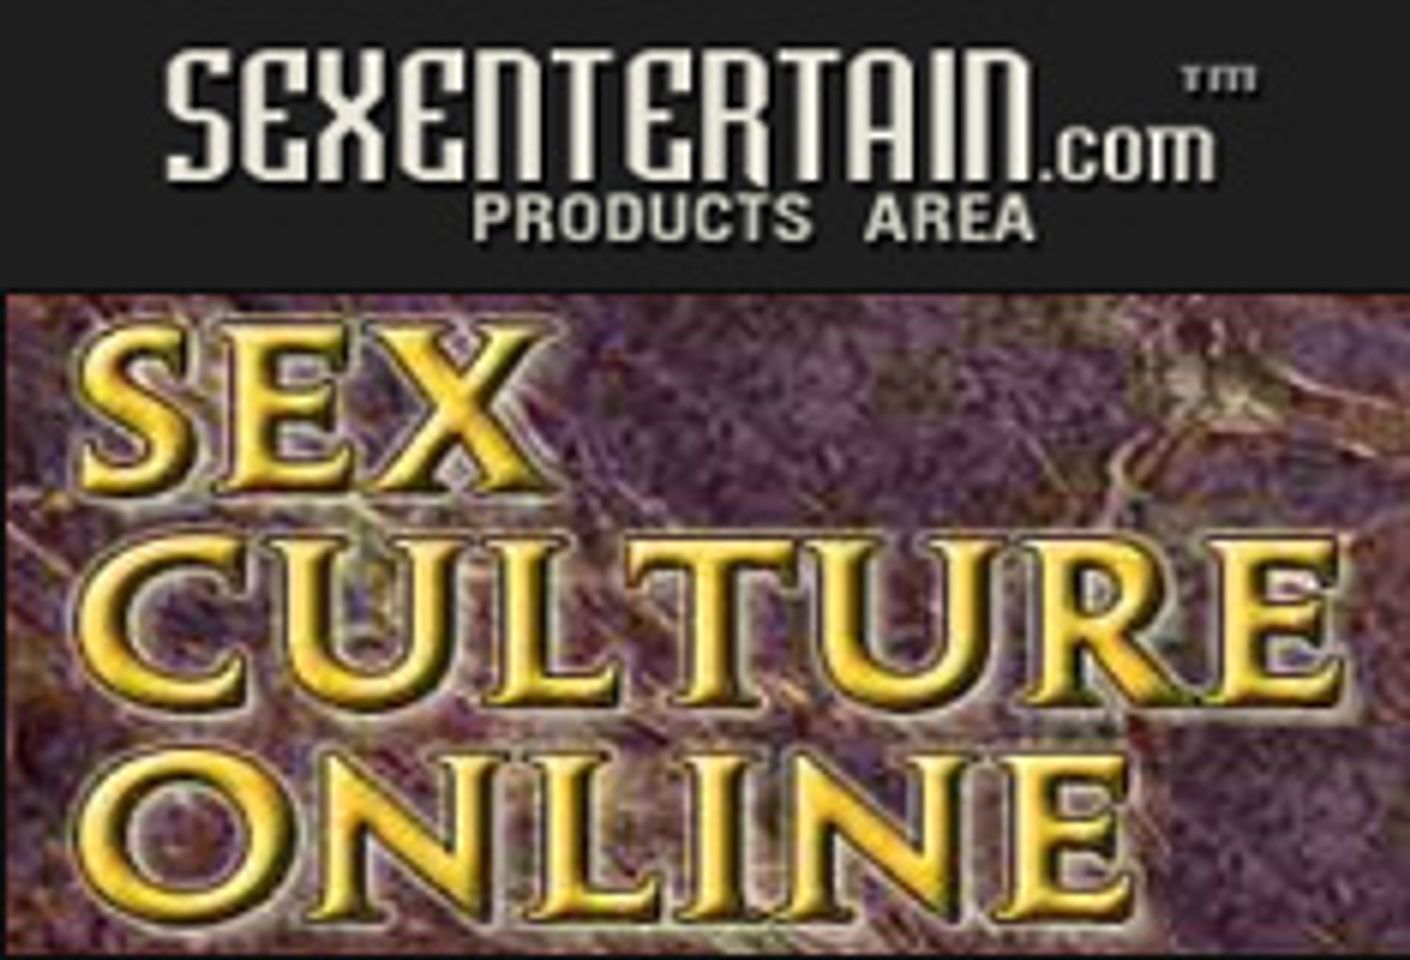 Sexentertain Partners With Sex Culture Online